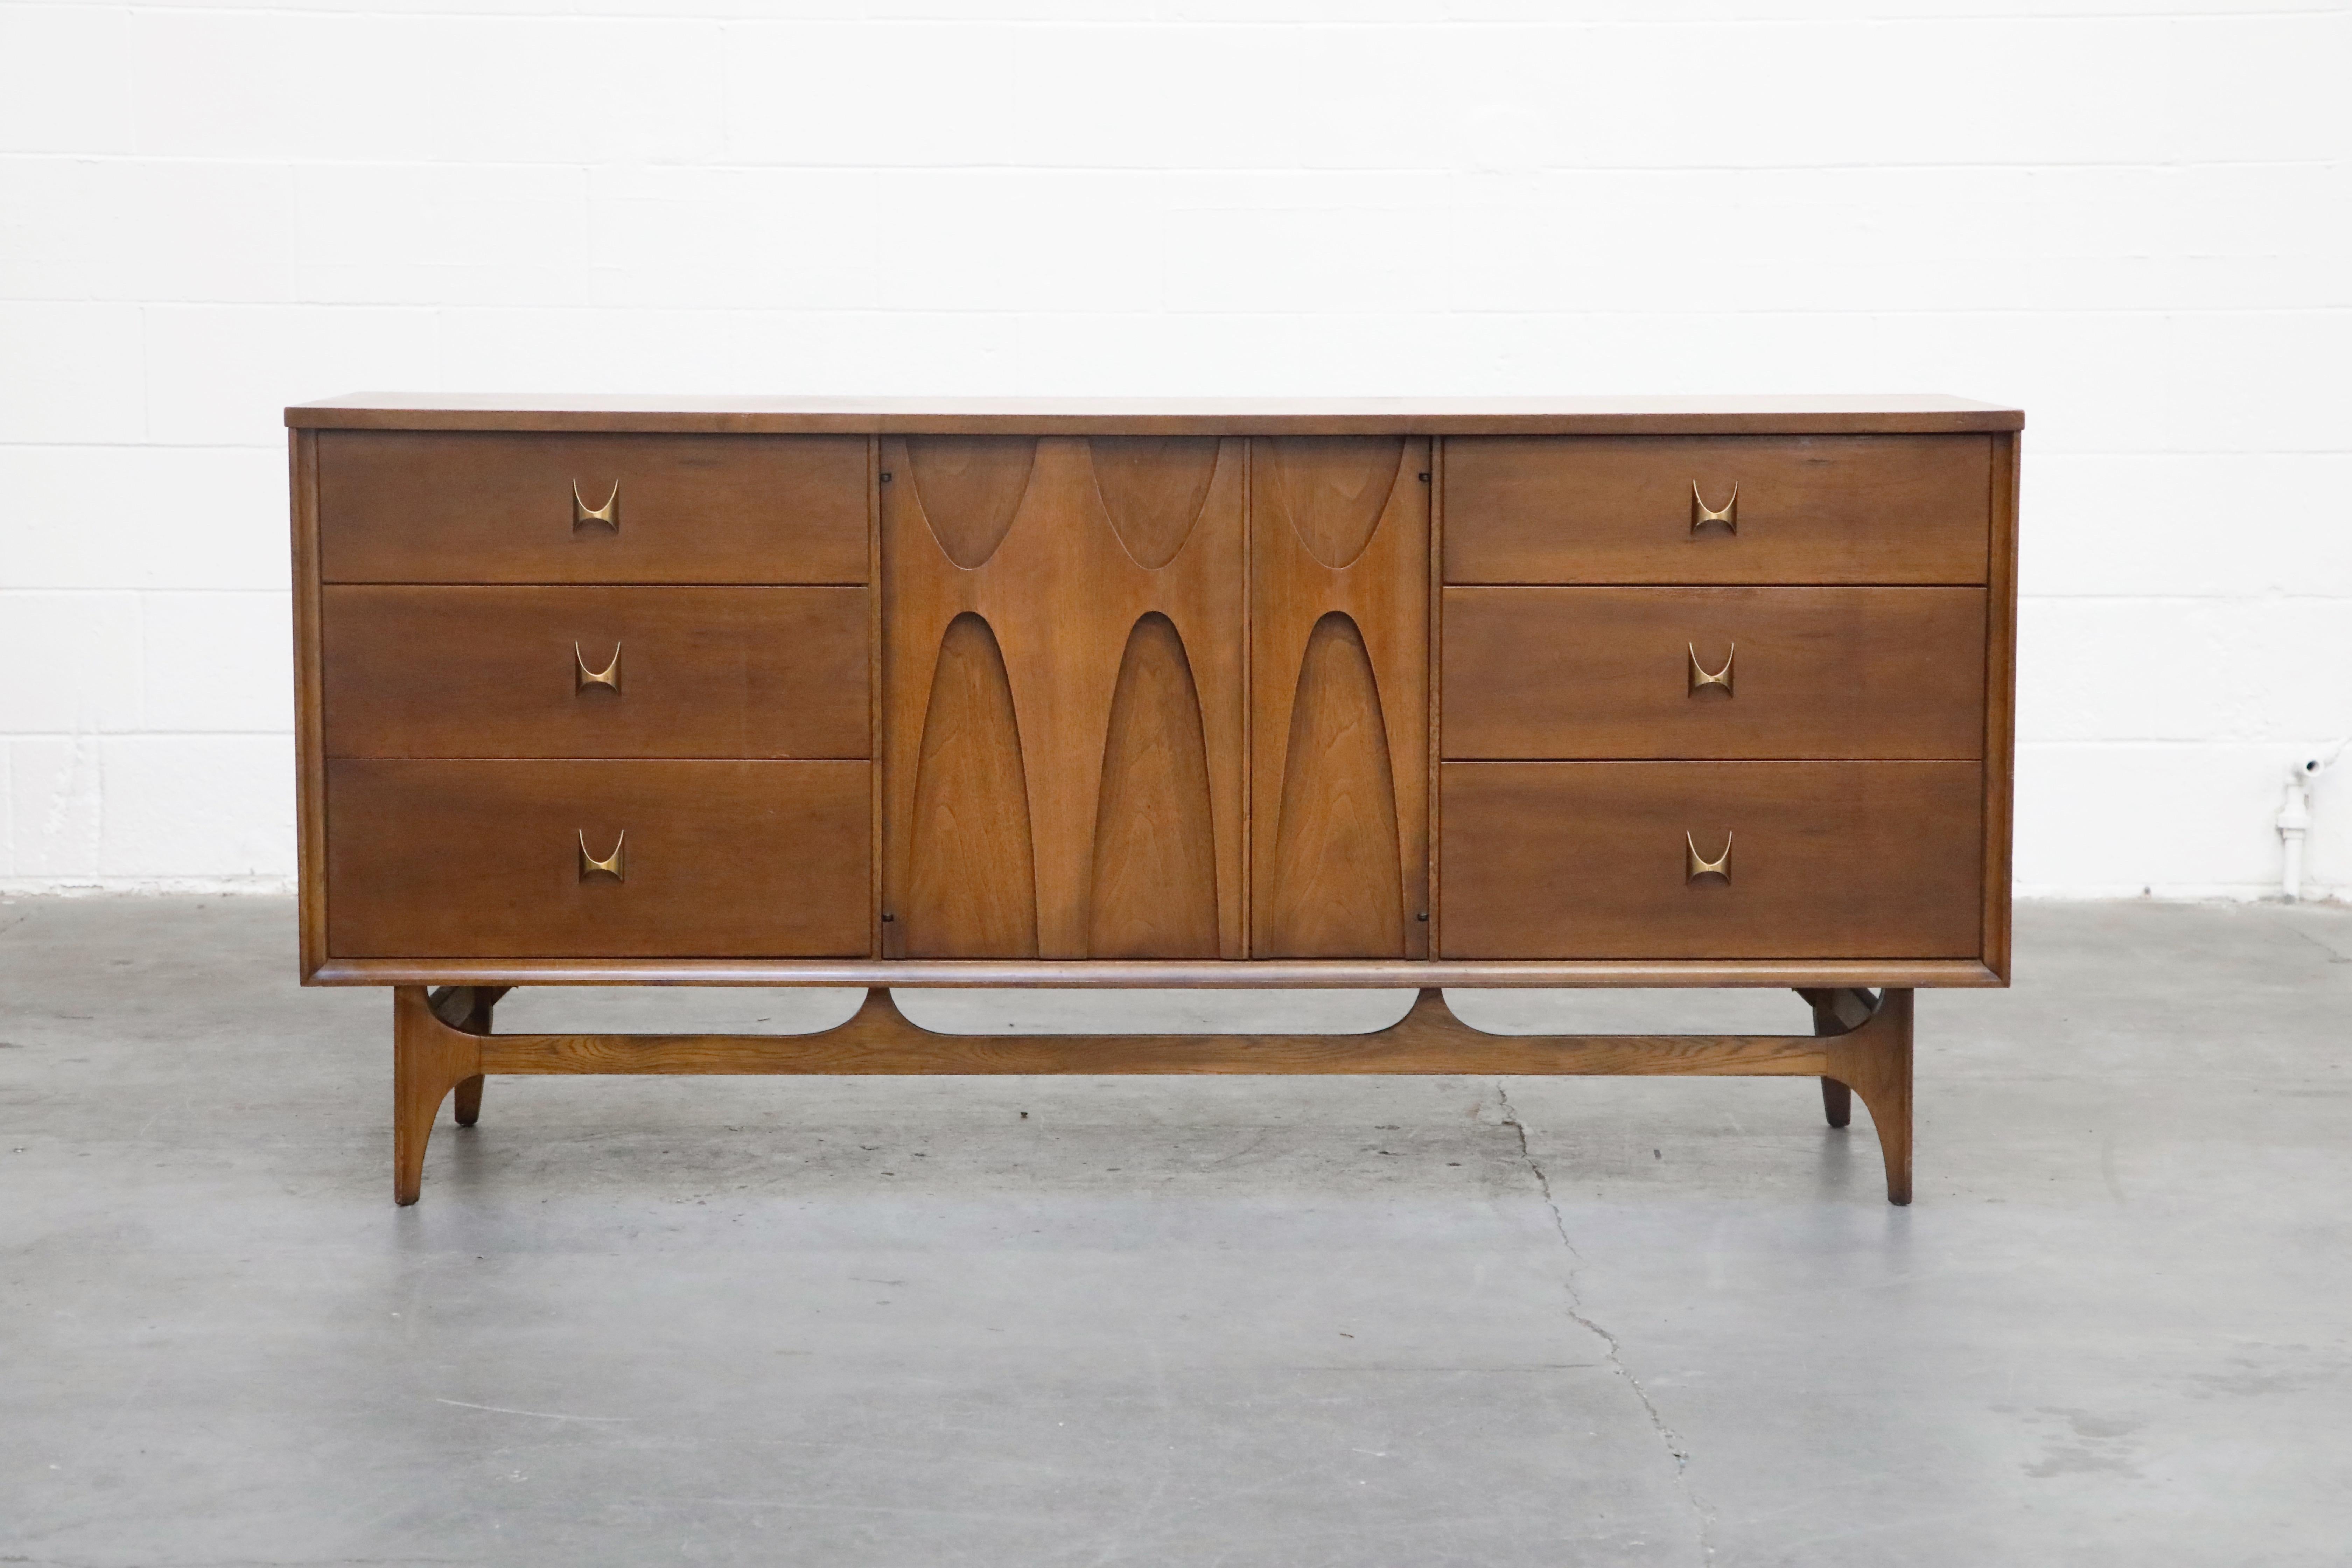 Attention Brasilia collectors... here is a gorgeous 'Brasilia' three-bay dresser in its original finish and in excellent vintage condition and is signed with its original Brasilia label. This beautiful dresser, which also works great as a sideboard